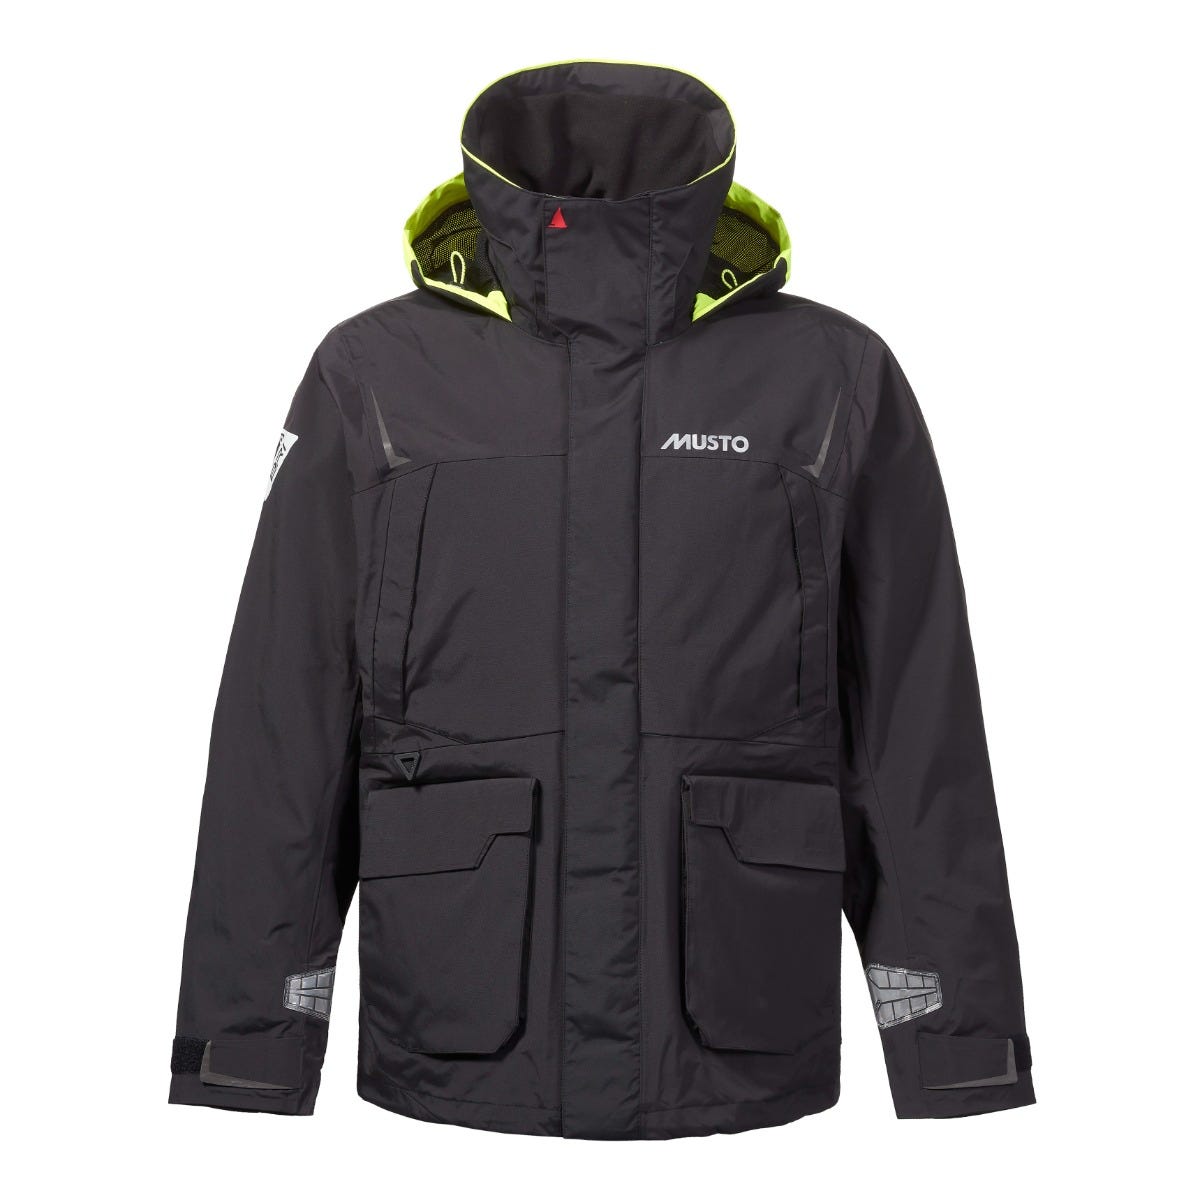 Musto BR1 Channel sailing jacket worn by Kate Middleton